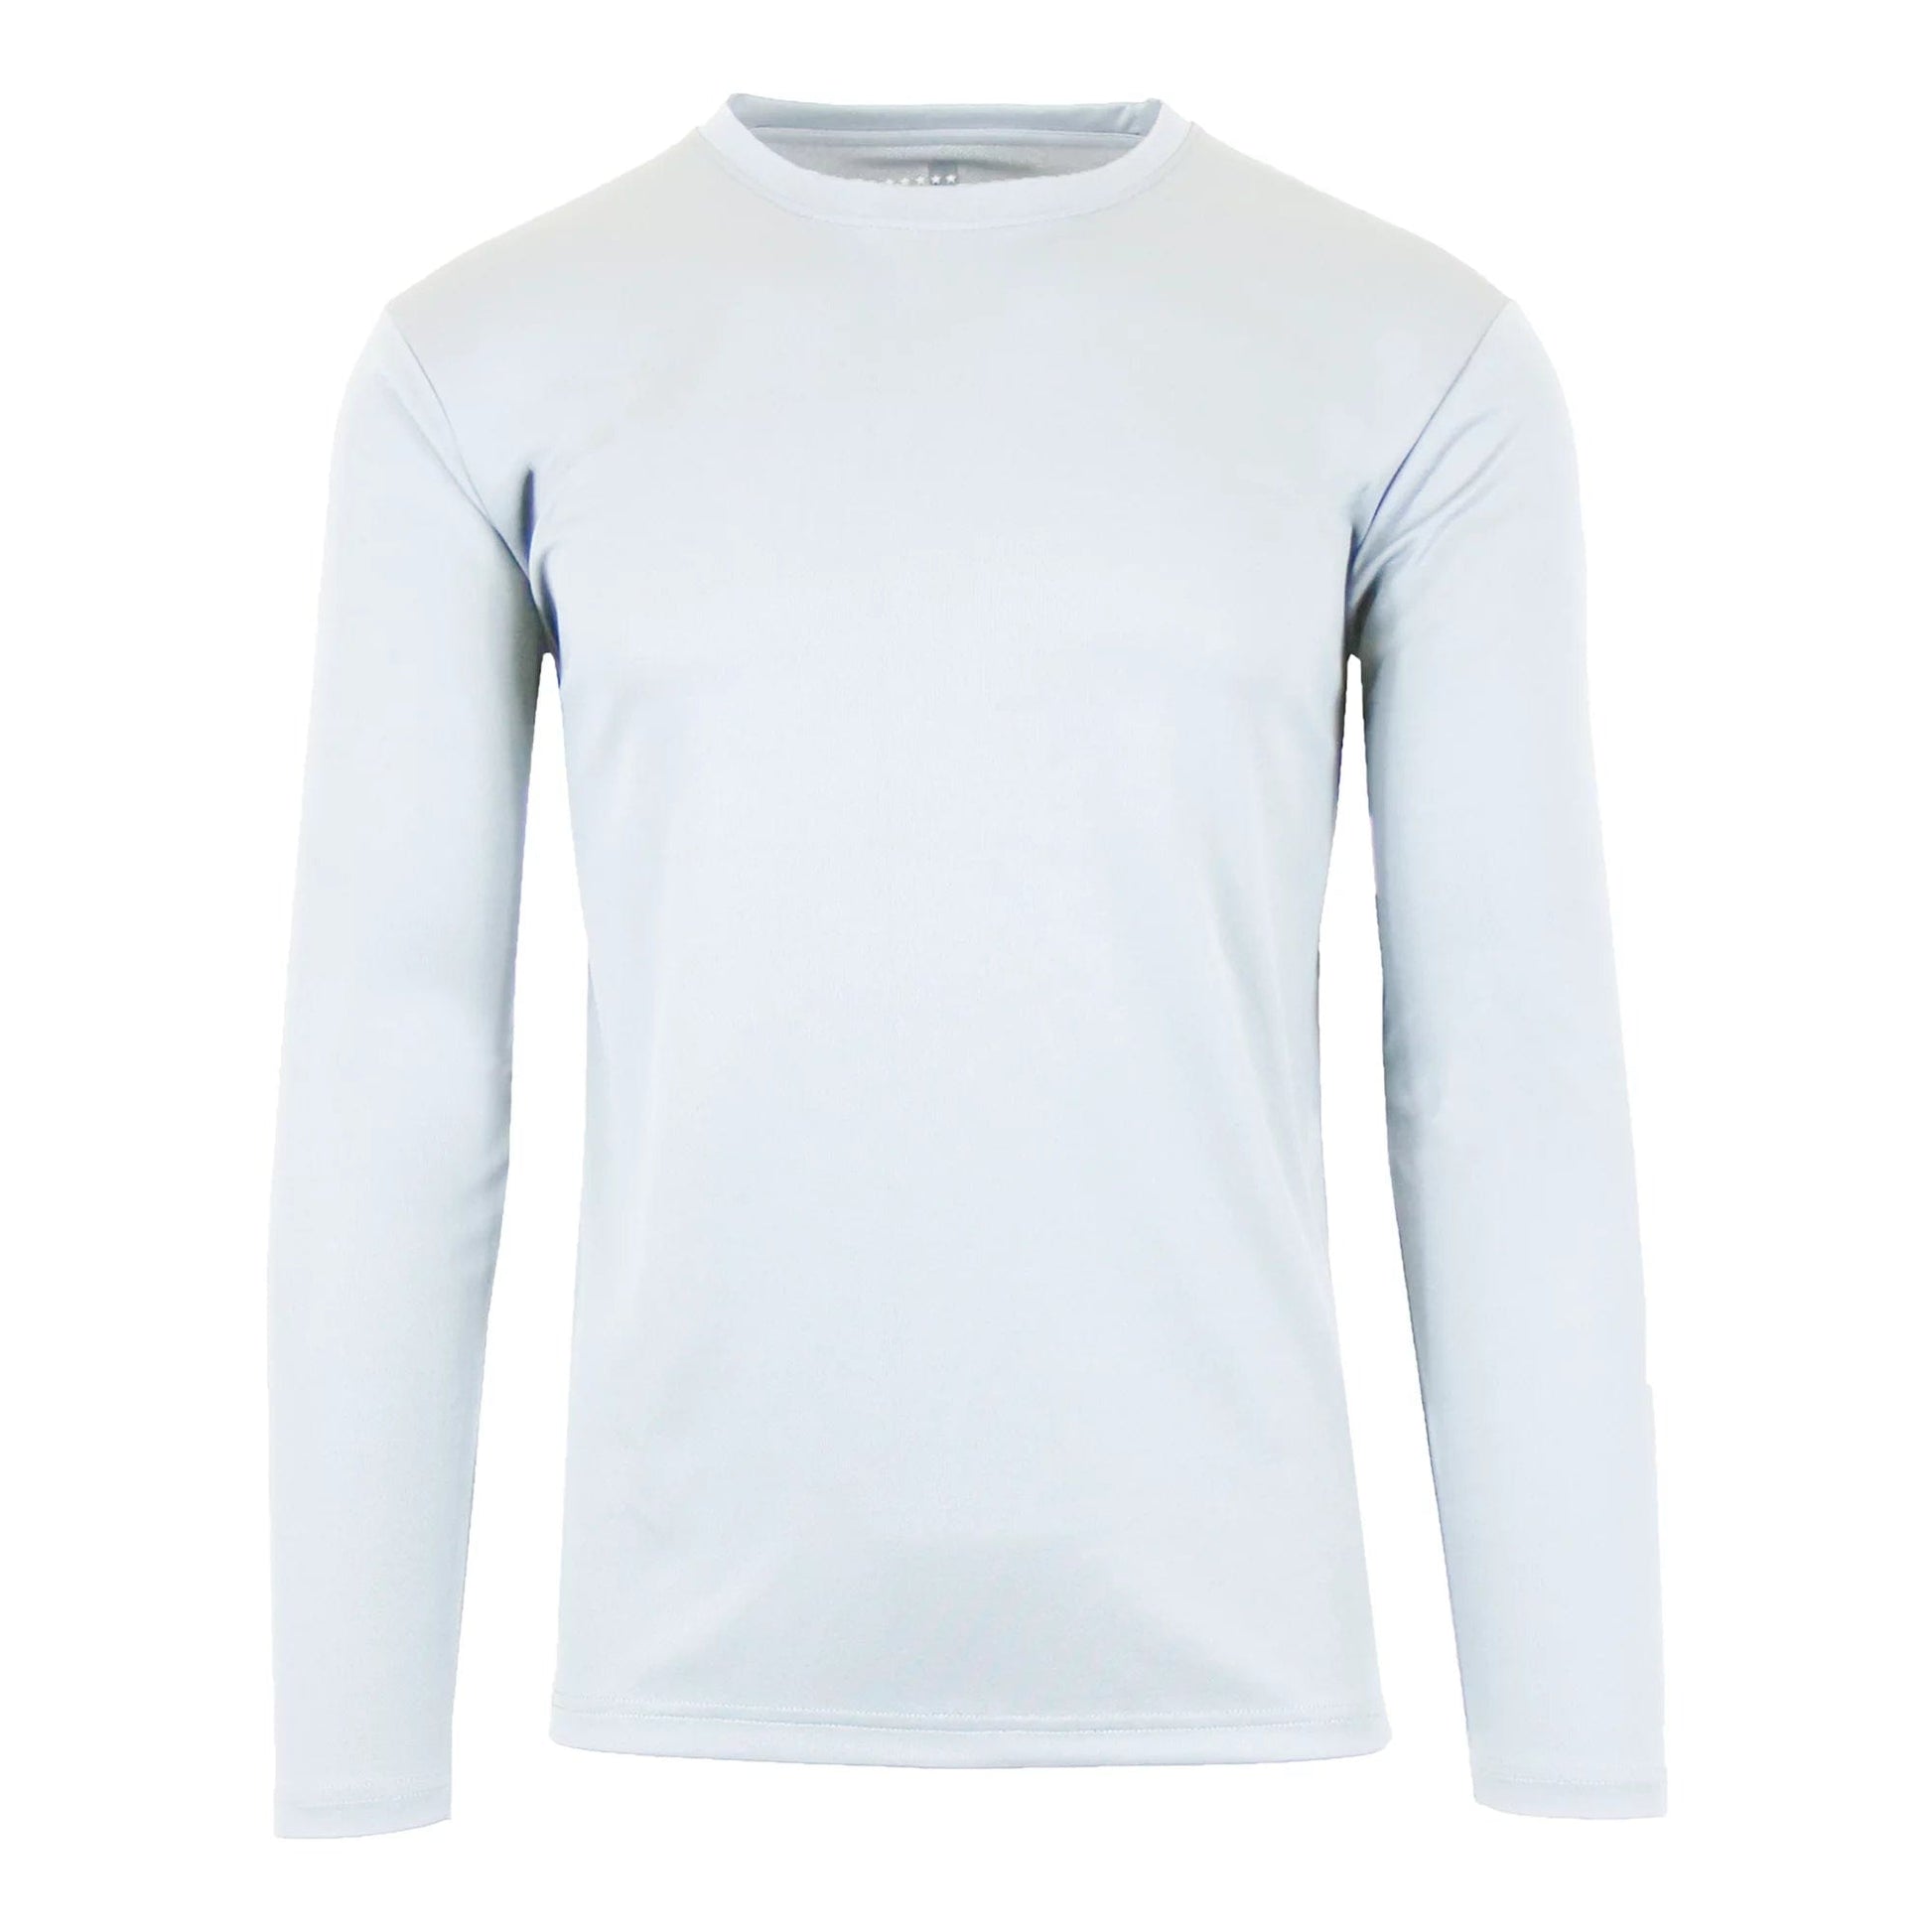 Men's Moisture Wicking Long Sleeve Performance Crew Neck Tagless Tee (Sizes, S-2XL) - GalaxybyHarvic